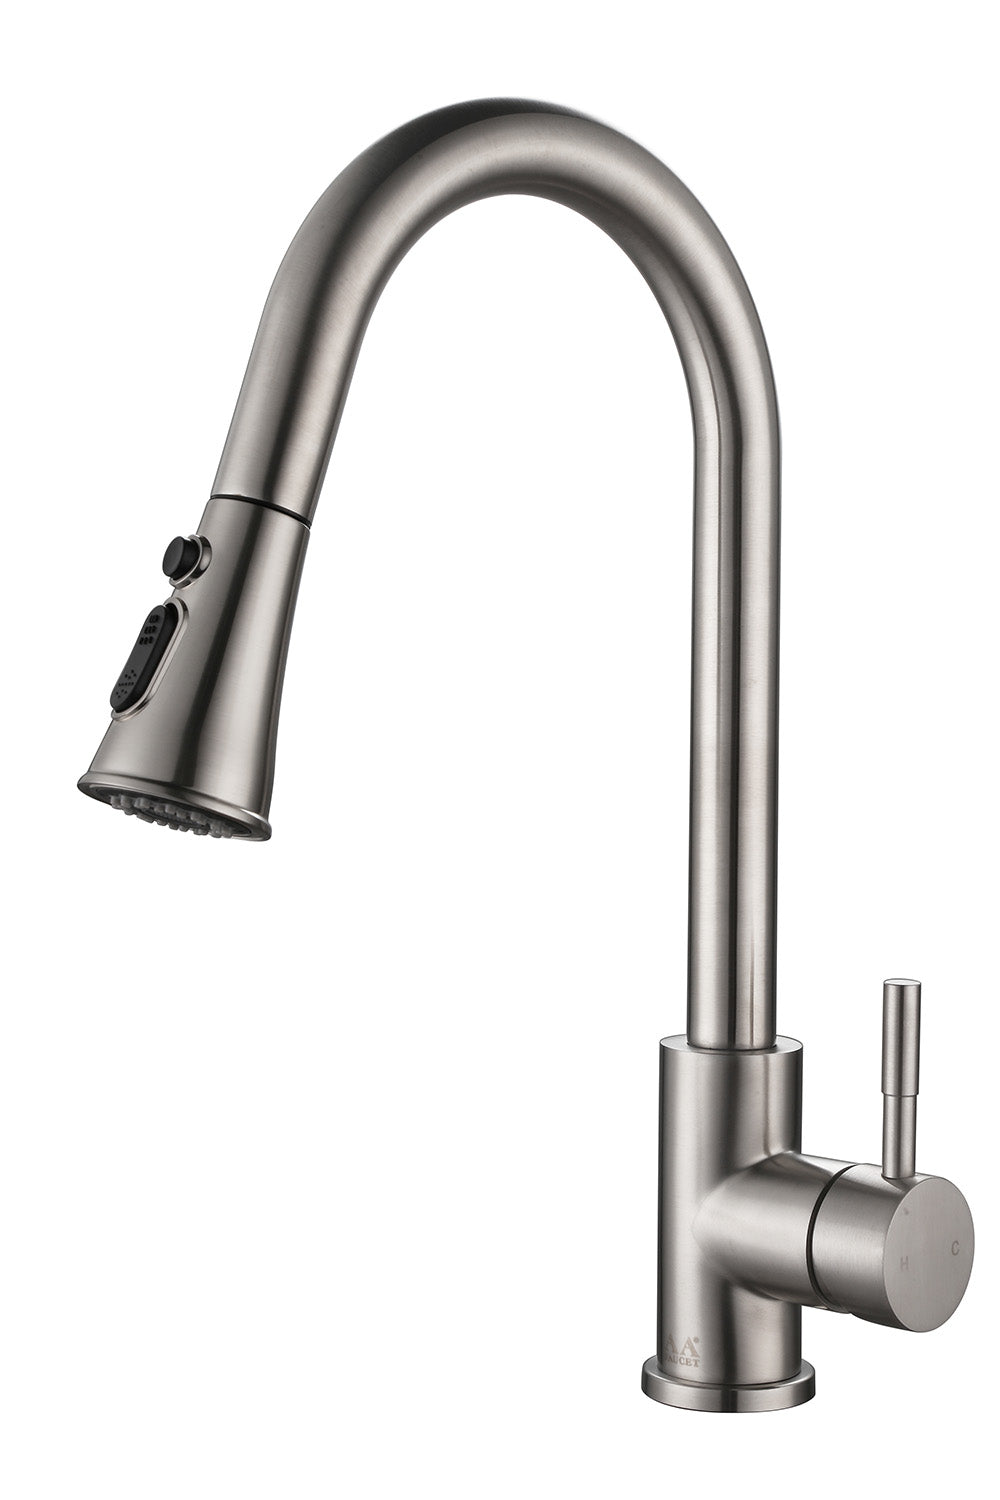 AA Faucet 3 Function Pull Out Sprayer, Single Handle, High Arc Design Brushed Nickel Stainless Steel Kitchen Sink Faucet